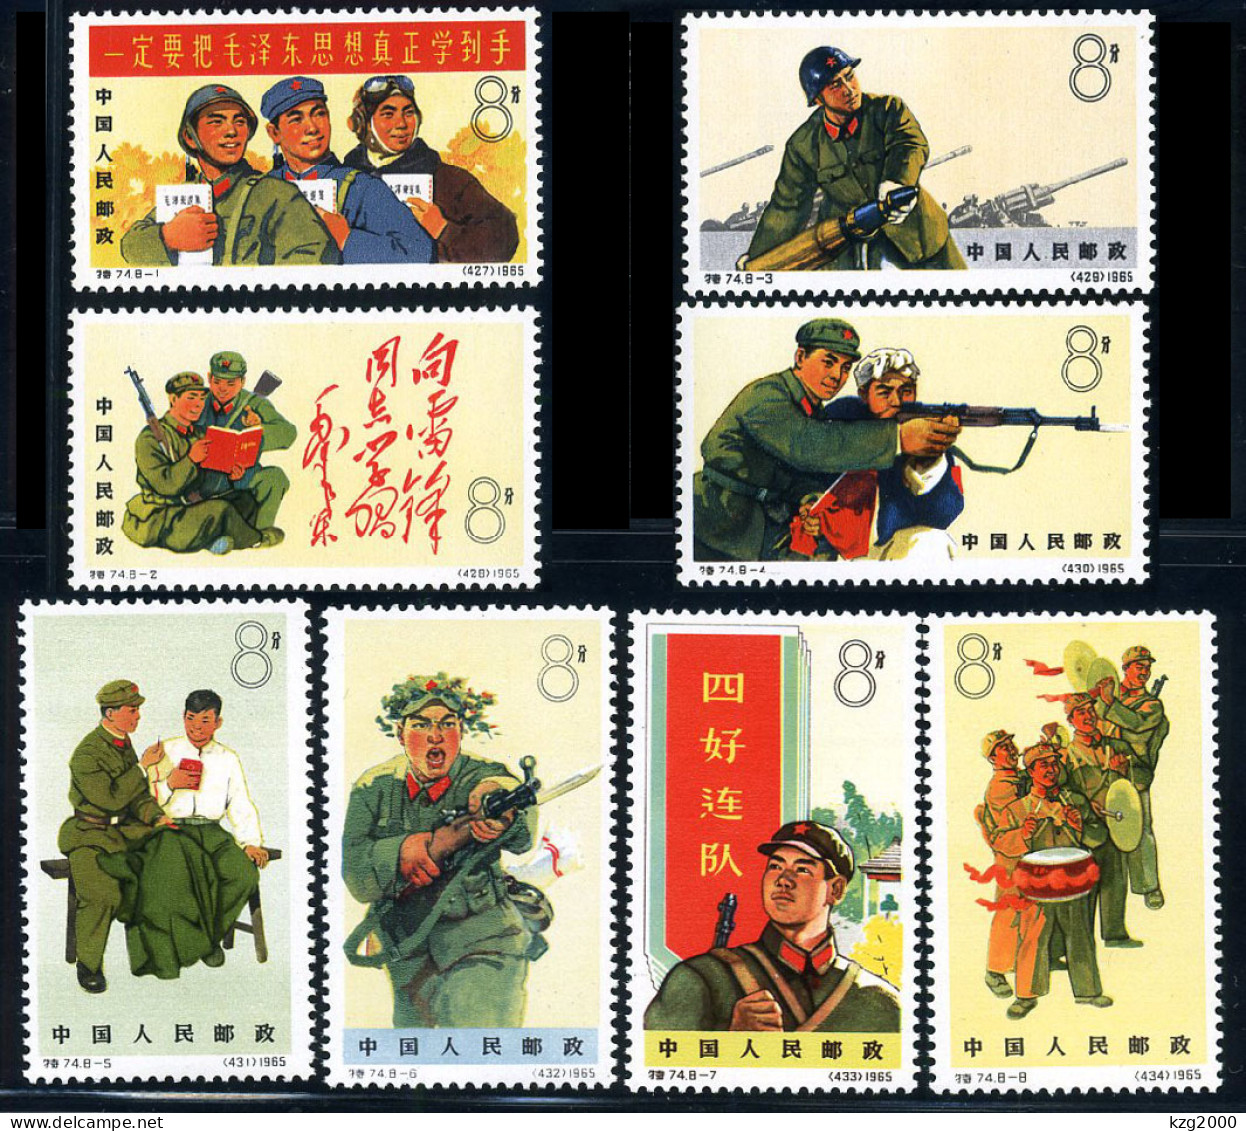 China Stamp 1965 S74 Chinese People's Liberration Army PLA Full Set Of 8 Stamps MNH - Ongebruikt